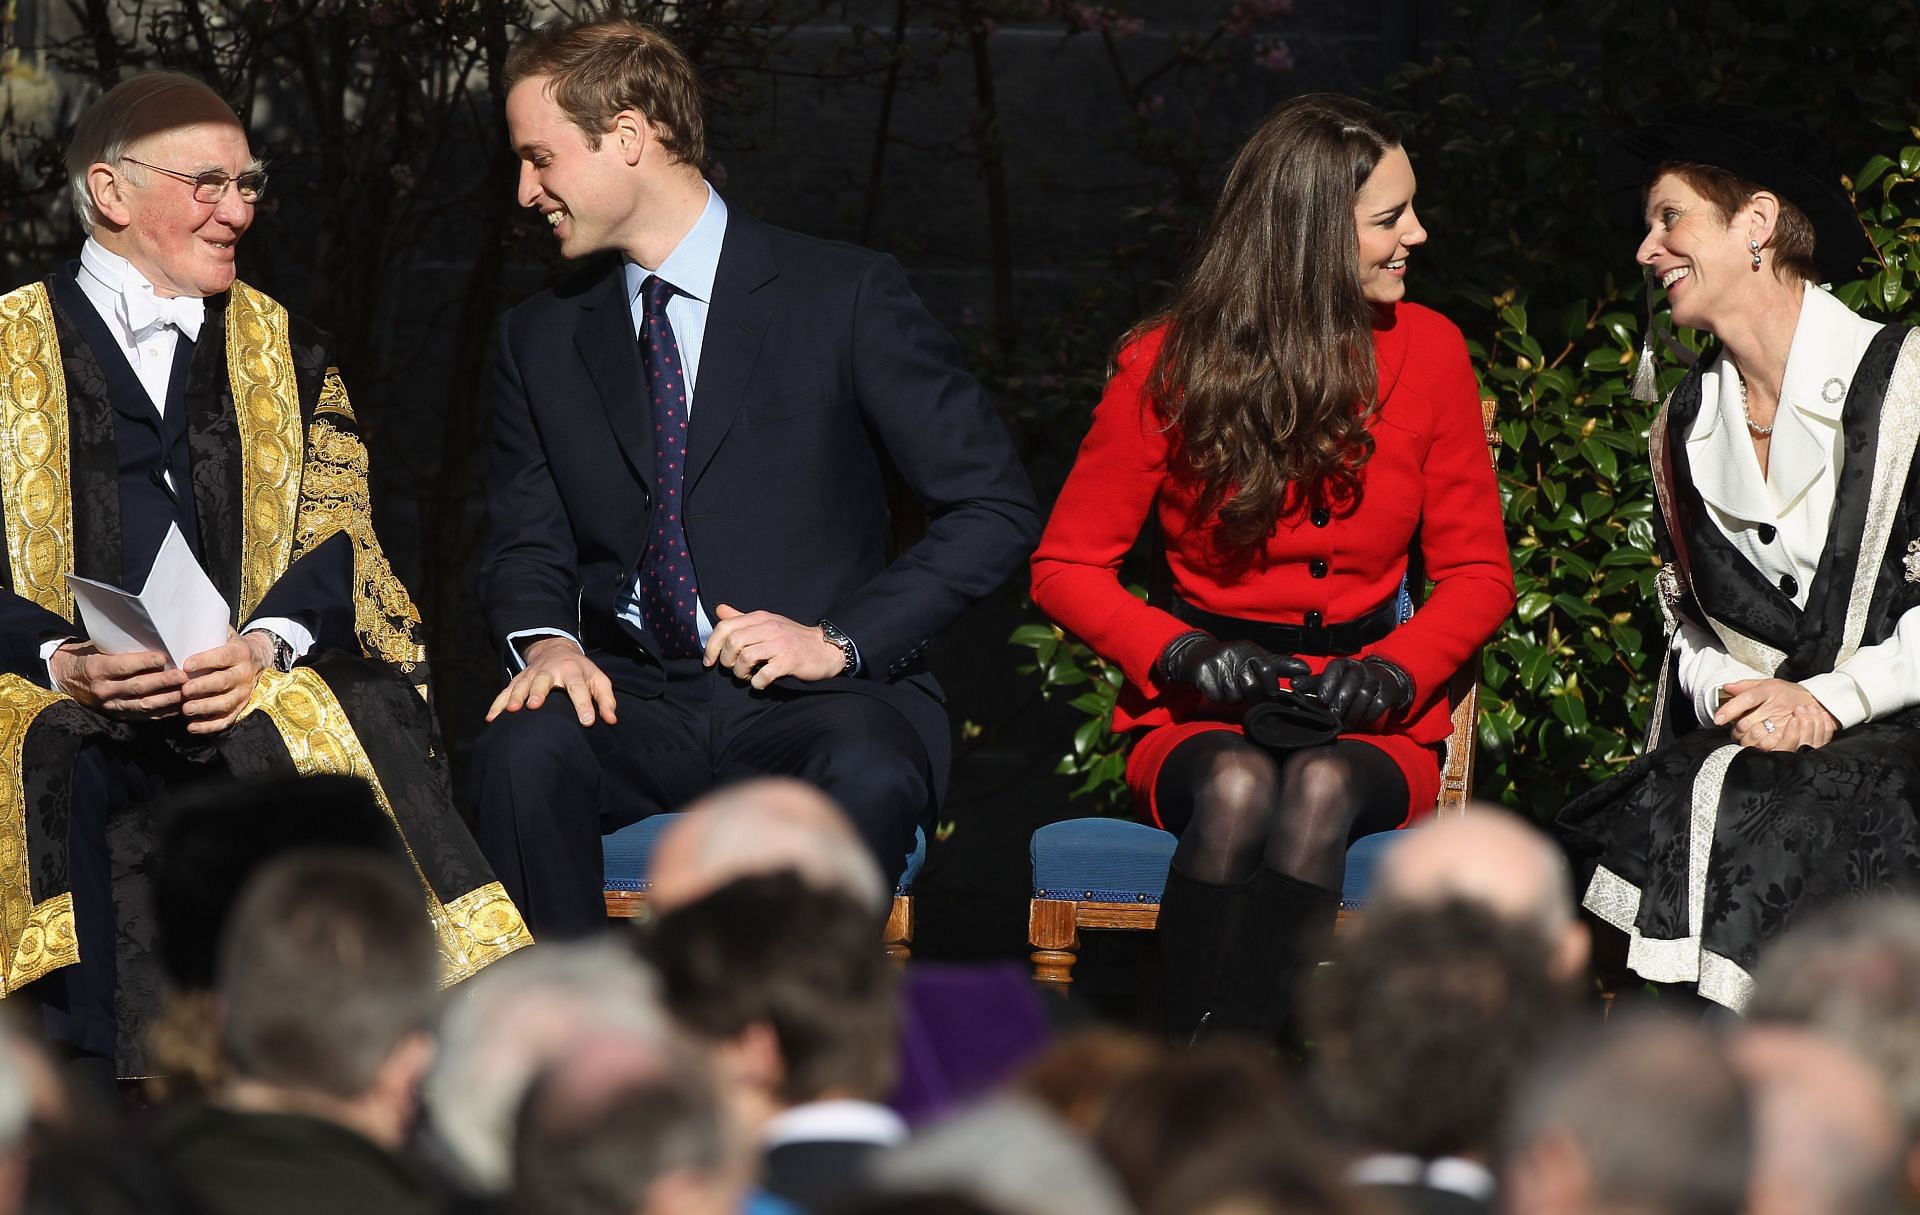 Prince William And Kate Middleton Visit The University Of St Andrews (Image via Getty)